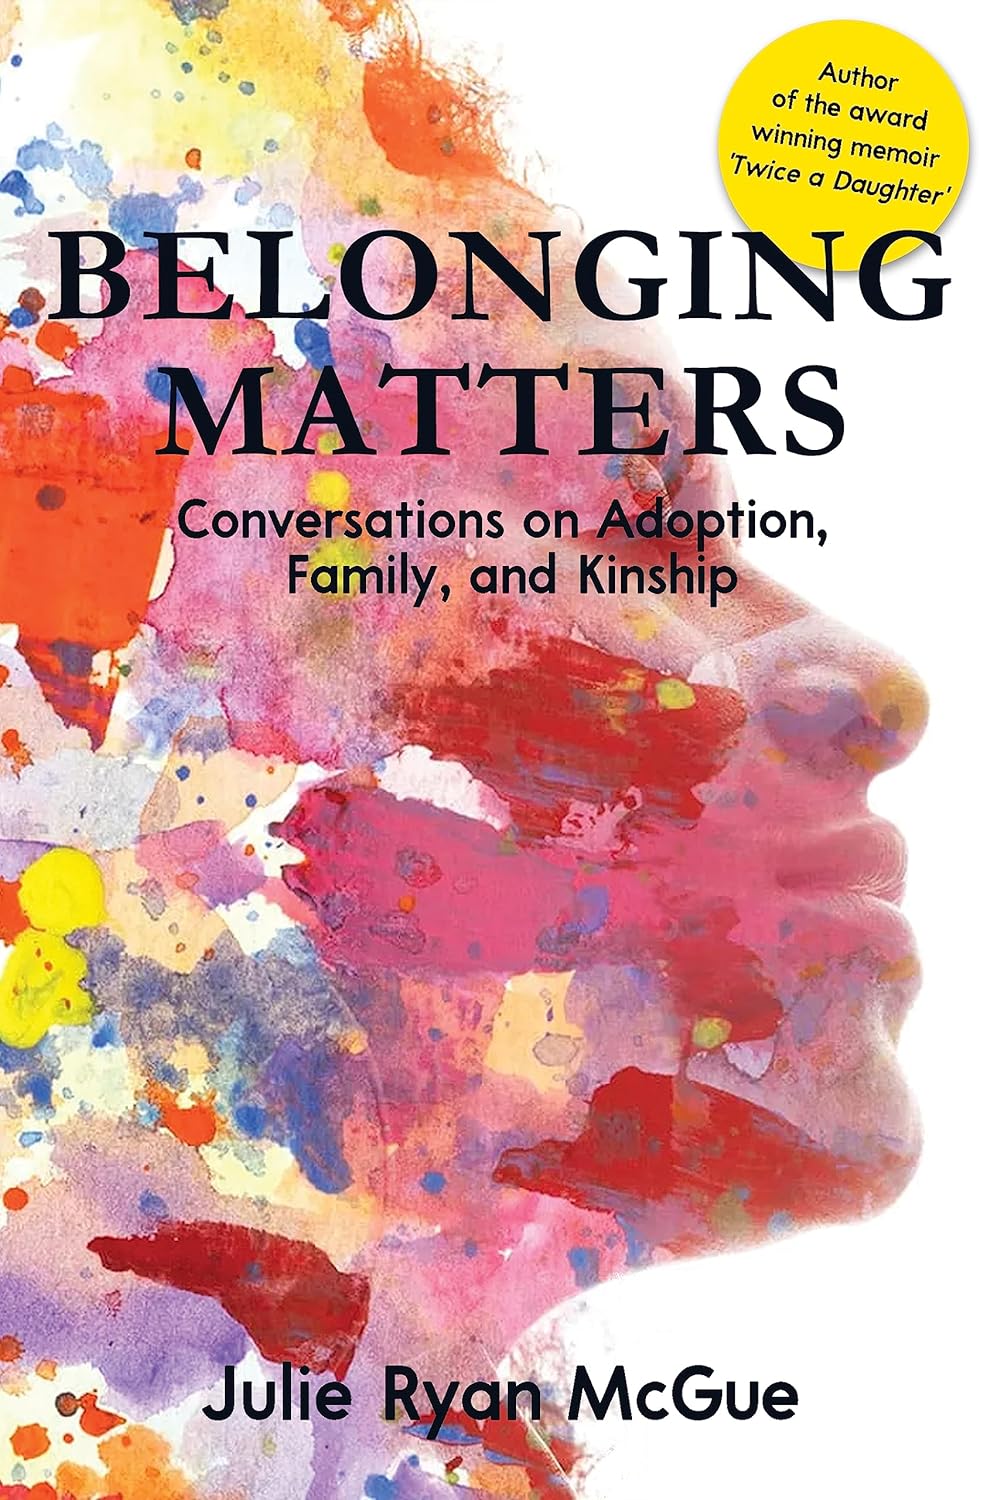 Part 8: Interview with Julie Ryan McGue, Author of Belonging Matters